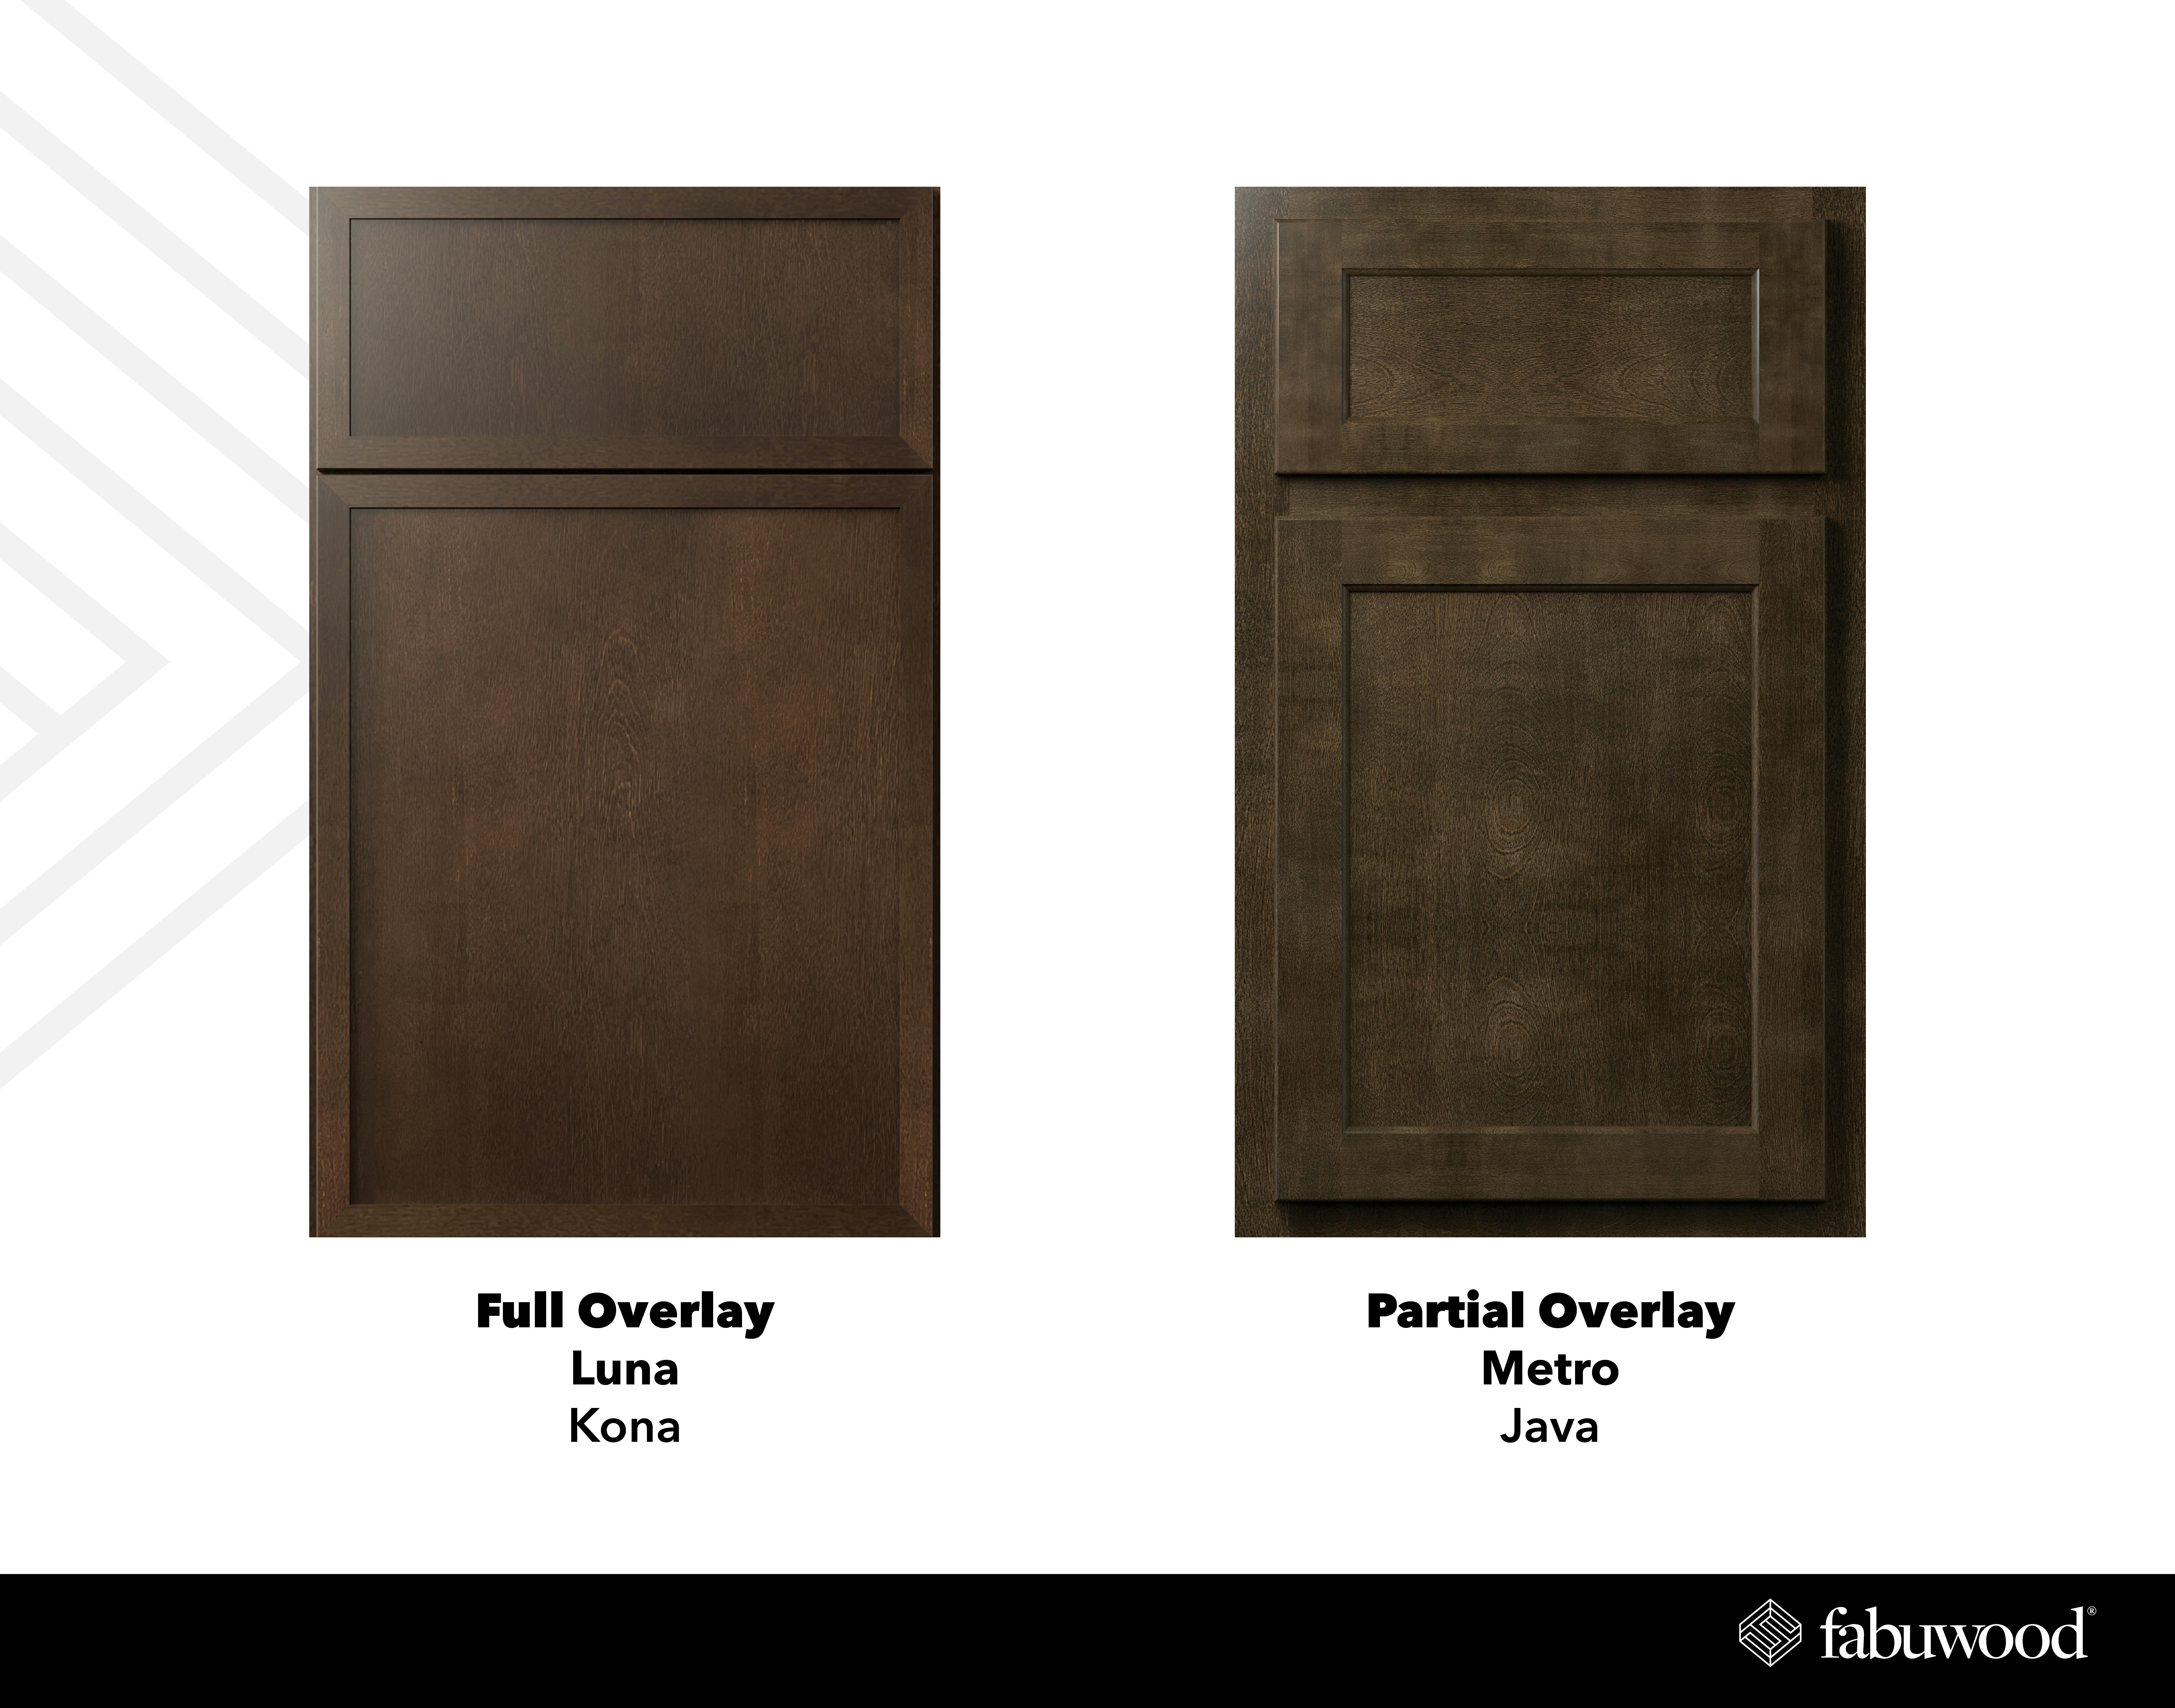 design styles of full overlay and partial overlay cabinets